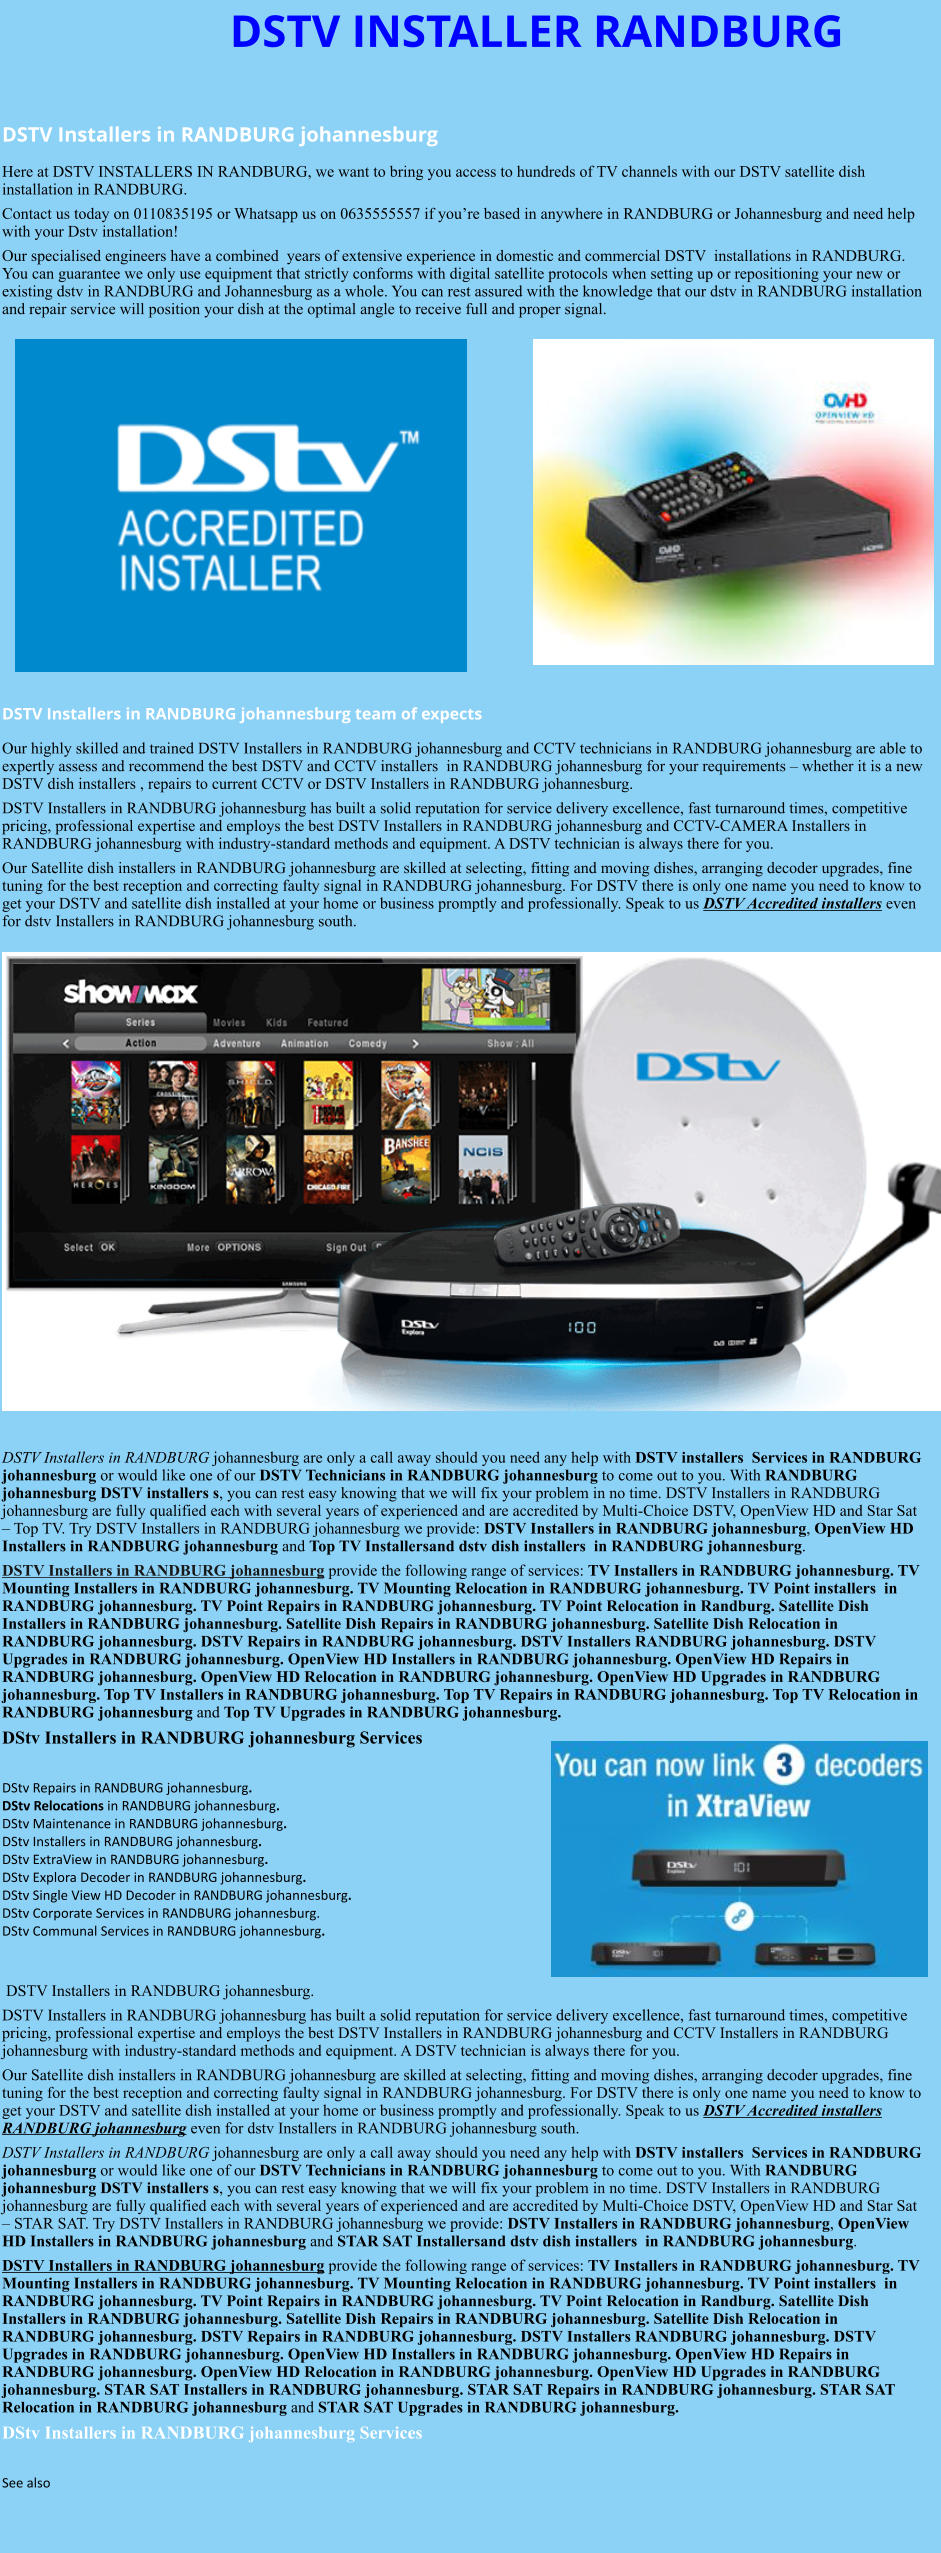 DSTV INSTALLER RANDBURG  DSTV Installers in RANDBURG johannesburg  Here at DSTV INSTALLERS IN RANDBURG, we want to bring you access to hundreds of TV channels with our DSTV satellite dish installation in RANDBURG. Contact us today on 0110835195 or Whatsapp us on 0635555557 if you’re based in anywhere in RANDBURG or Johannesburg and need help with your Dstv installation! Our specialised engineers have a combined  years of extensive experience in domestic and commercial DSTV  installations in RANDBURG. You can guarantee we only use equipment that strictly conforms with digital satellite protocols when setting up or repositioning your new or existing dstv in RANDBURG and Johannesburg as a whole. You can rest assured with the knowledge that our dstv in RANDBURG installation and repair service will position your dish at the optimal angle to receive full and proper signal.                DSTV Installers in RANDBURG johannesburg team of expects Our highly skilled and trained DSTV Installers in RANDBURG johannesburg and CCTV technicians in RANDBURG johannesburg are able to expertly assess and recommend the best DSTV and CCTV installers  in RANDBURG johannesburg for your requirements – whether it is a new DSTV dish installers , repairs to current CCTV or DSTV Installers in RANDBURG johannesburg. DSTV Installers in RANDBURG johannesburg has built a solid reputation for service delivery excellence, fast turnaround times, competitive pricing, professional expertise and employs the best DSTV Installers in RANDBURG johannesburg and CCTV-CAMERA Installers in RANDBURG johannesburg with industry-standard methods and equipment. A DSTV technician is always there for you. Our Satellite dish installers in RANDBURG johannesburg are skilled at selecting, fitting and moving dishes, arranging decoder upgrades, fine tuning for the best reception and correcting faulty signal in RANDBURG johannesburg. For DSTV there is only one name you need to know to get your DSTV and satellite dish installed at your home or business promptly and professionally. Speak to us DSTV Accredited installers even for dstv Installers in RANDBURG johannesburg south.                      DSTV Installers in RANDBURG johannesburg are only a call away should you need any help with DSTV installers  Services in RANDBURG johannesburg or would like one of our DSTV Technicians in RANDBURG johannesburg to come out to you. With RANDBURG johannesburg DSTV installers s, you can rest easy knowing that we will fix your problem in no time. DSTV Installers in RANDBURG johannesburg are fully qualified each with several years of experienced and are accredited by Multi-Choice DSTV, OpenView HD and Star Sat – Top TV. Try DSTV Installers in RANDBURG johannesburg we provide: DSTV Installers in RANDBURG johannesburg, OpenView HD Installers in RANDBURG johannesburg and Top TV Installersand dstv dish installers  in RANDBURG johannesburg. DSTV Installers in RANDBURG johannesburg provide the following range of services: TV Installers in RANDBURG johannesburg. TV Mounting Installers in RANDBURG johannesburg. TV Mounting Relocation in RANDBURG johannesburg. TV Point installers  in RANDBURG johannesburg. TV Point Repairs in RANDBURG johannesburg. TV Point Relocation in Randburg. Satellite Dish Installers in RANDBURG johannesburg. Satellite Dish Repairs in RANDBURG johannesburg. Satellite Dish Relocation in RANDBURG johannesburg. DSTV Repairs in RANDBURG johannesburg. DSTV Installers RANDBURG johannesburg. DSTV Upgrades in RANDBURG johannesburg. OpenView HD Installers in RANDBURG johannesburg. OpenView HD Repairs in RANDBURG johannesburg. OpenView HD Relocation in RANDBURG johannesburg. OpenView HD Upgrades in RANDBURG johannesburg. Top TV Installers in RANDBURG johannesburg. Top TV Repairs in RANDBURG johannesburg. Top TV Relocation in RANDBURG johannesburg and Top TV Upgrades in RANDBURG johannesburg. DStv Installers in RANDBURG johannesburg Services  DStv Repairs in RANDBURG johannesburg.  DStv Relocations in RANDBURG johannesburg.  DStv Maintenance in RANDBURG johannesburg. DStv Installers in RANDBURG johannesburg. DStv ExtraView in RANDBURG johannesburg. DStv Explora Decoder in RANDBURG johannesburg. DStv Single View HD Decoder in RANDBURG johannesburg. DStv Corporate Services in RANDBURG johannesburg. DStv Communal Services in RANDBURG johannesburg.    DSTV Installers in RANDBURG johannesburg. DSTV Installers in RANDBURG johannesburg has built a solid reputation for service delivery excellence, fast turnaround times, competitive pricing, professional expertise and employs the best DSTV Installers in RANDBURG johannesburg and CCTV Installers in RANDBURG johannesburg with industry-standard methods and equipment. A DSTV technician is always there for you. Our Satellite dish installers in RANDBURG johannesburg are skilled at selecting, fitting and moving dishes, arranging decoder upgrades, fine tuning for the best reception and correcting faulty signal in RANDBURG johannesburg. For DSTV there is only one name you need to know to get your DSTV and satellite dish installed at your home or business promptly and professionally. Speak to us DSTV Accredited installers RANDBURG johannesburg even for dstv Installers in RANDBURG johannesburg south. DSTV Installers in RANDBURG johannesburg are only a call away should you need any help with DSTV installers  Services in RANDBURG johannesburg or would like one of our DSTV Technicians in RANDBURG johannesburg to come out to you. With RANDBURG johannesburg DSTV installers s, you can rest easy knowing that we will fix your problem in no time. DSTV Installers in RANDBURG johannesburg are fully qualified each with several years of experienced and are accredited by Multi-Choice DSTV, OpenView HD and Star Sat – STAR SAT. Try DSTV Installers in RANDBURG johannesburg we provide: DSTV Installers in RANDBURG johannesburg, OpenView HD Installers in RANDBURG johannesburg and STAR SAT Installersand dstv dish installers  in RANDBURG johannesburg. DSTV Installers in RANDBURG johannesburg provide the following range of services: TV Installers in RANDBURG johannesburg. TV Mounting Installers in RANDBURG johannesburg. TV Mounting Relocation in RANDBURG johannesburg. TV Point installers  in RANDBURG johannesburg. TV Point Repairs in RANDBURG johannesburg. TV Point Relocation in Randburg. Satellite Dish Installers in RANDBURG johannesburg. Satellite Dish Repairs in RANDBURG johannesburg. Satellite Dish Relocation in RANDBURG johannesburg. DSTV Repairs in RANDBURG johannesburg. DSTV Installers RANDBURG johannesburg. DSTV Upgrades in RANDBURG johannesburg. OpenView HD Installers in RANDBURG johannesburg. OpenView HD Repairs in RANDBURG johannesburg. OpenView HD Relocation in RANDBURG johannesburg. OpenView HD Upgrades in RANDBURG johannesburg. STAR SAT Installers in RANDBURG johannesburg. STAR SAT Repairs in RANDBURG johannesburg. STAR SAT Relocation in RANDBURG johannesburg and STAR SAT Upgrades in RANDBURG johannesburg. DStv Installers in RANDBURG johannesburg Services  See also